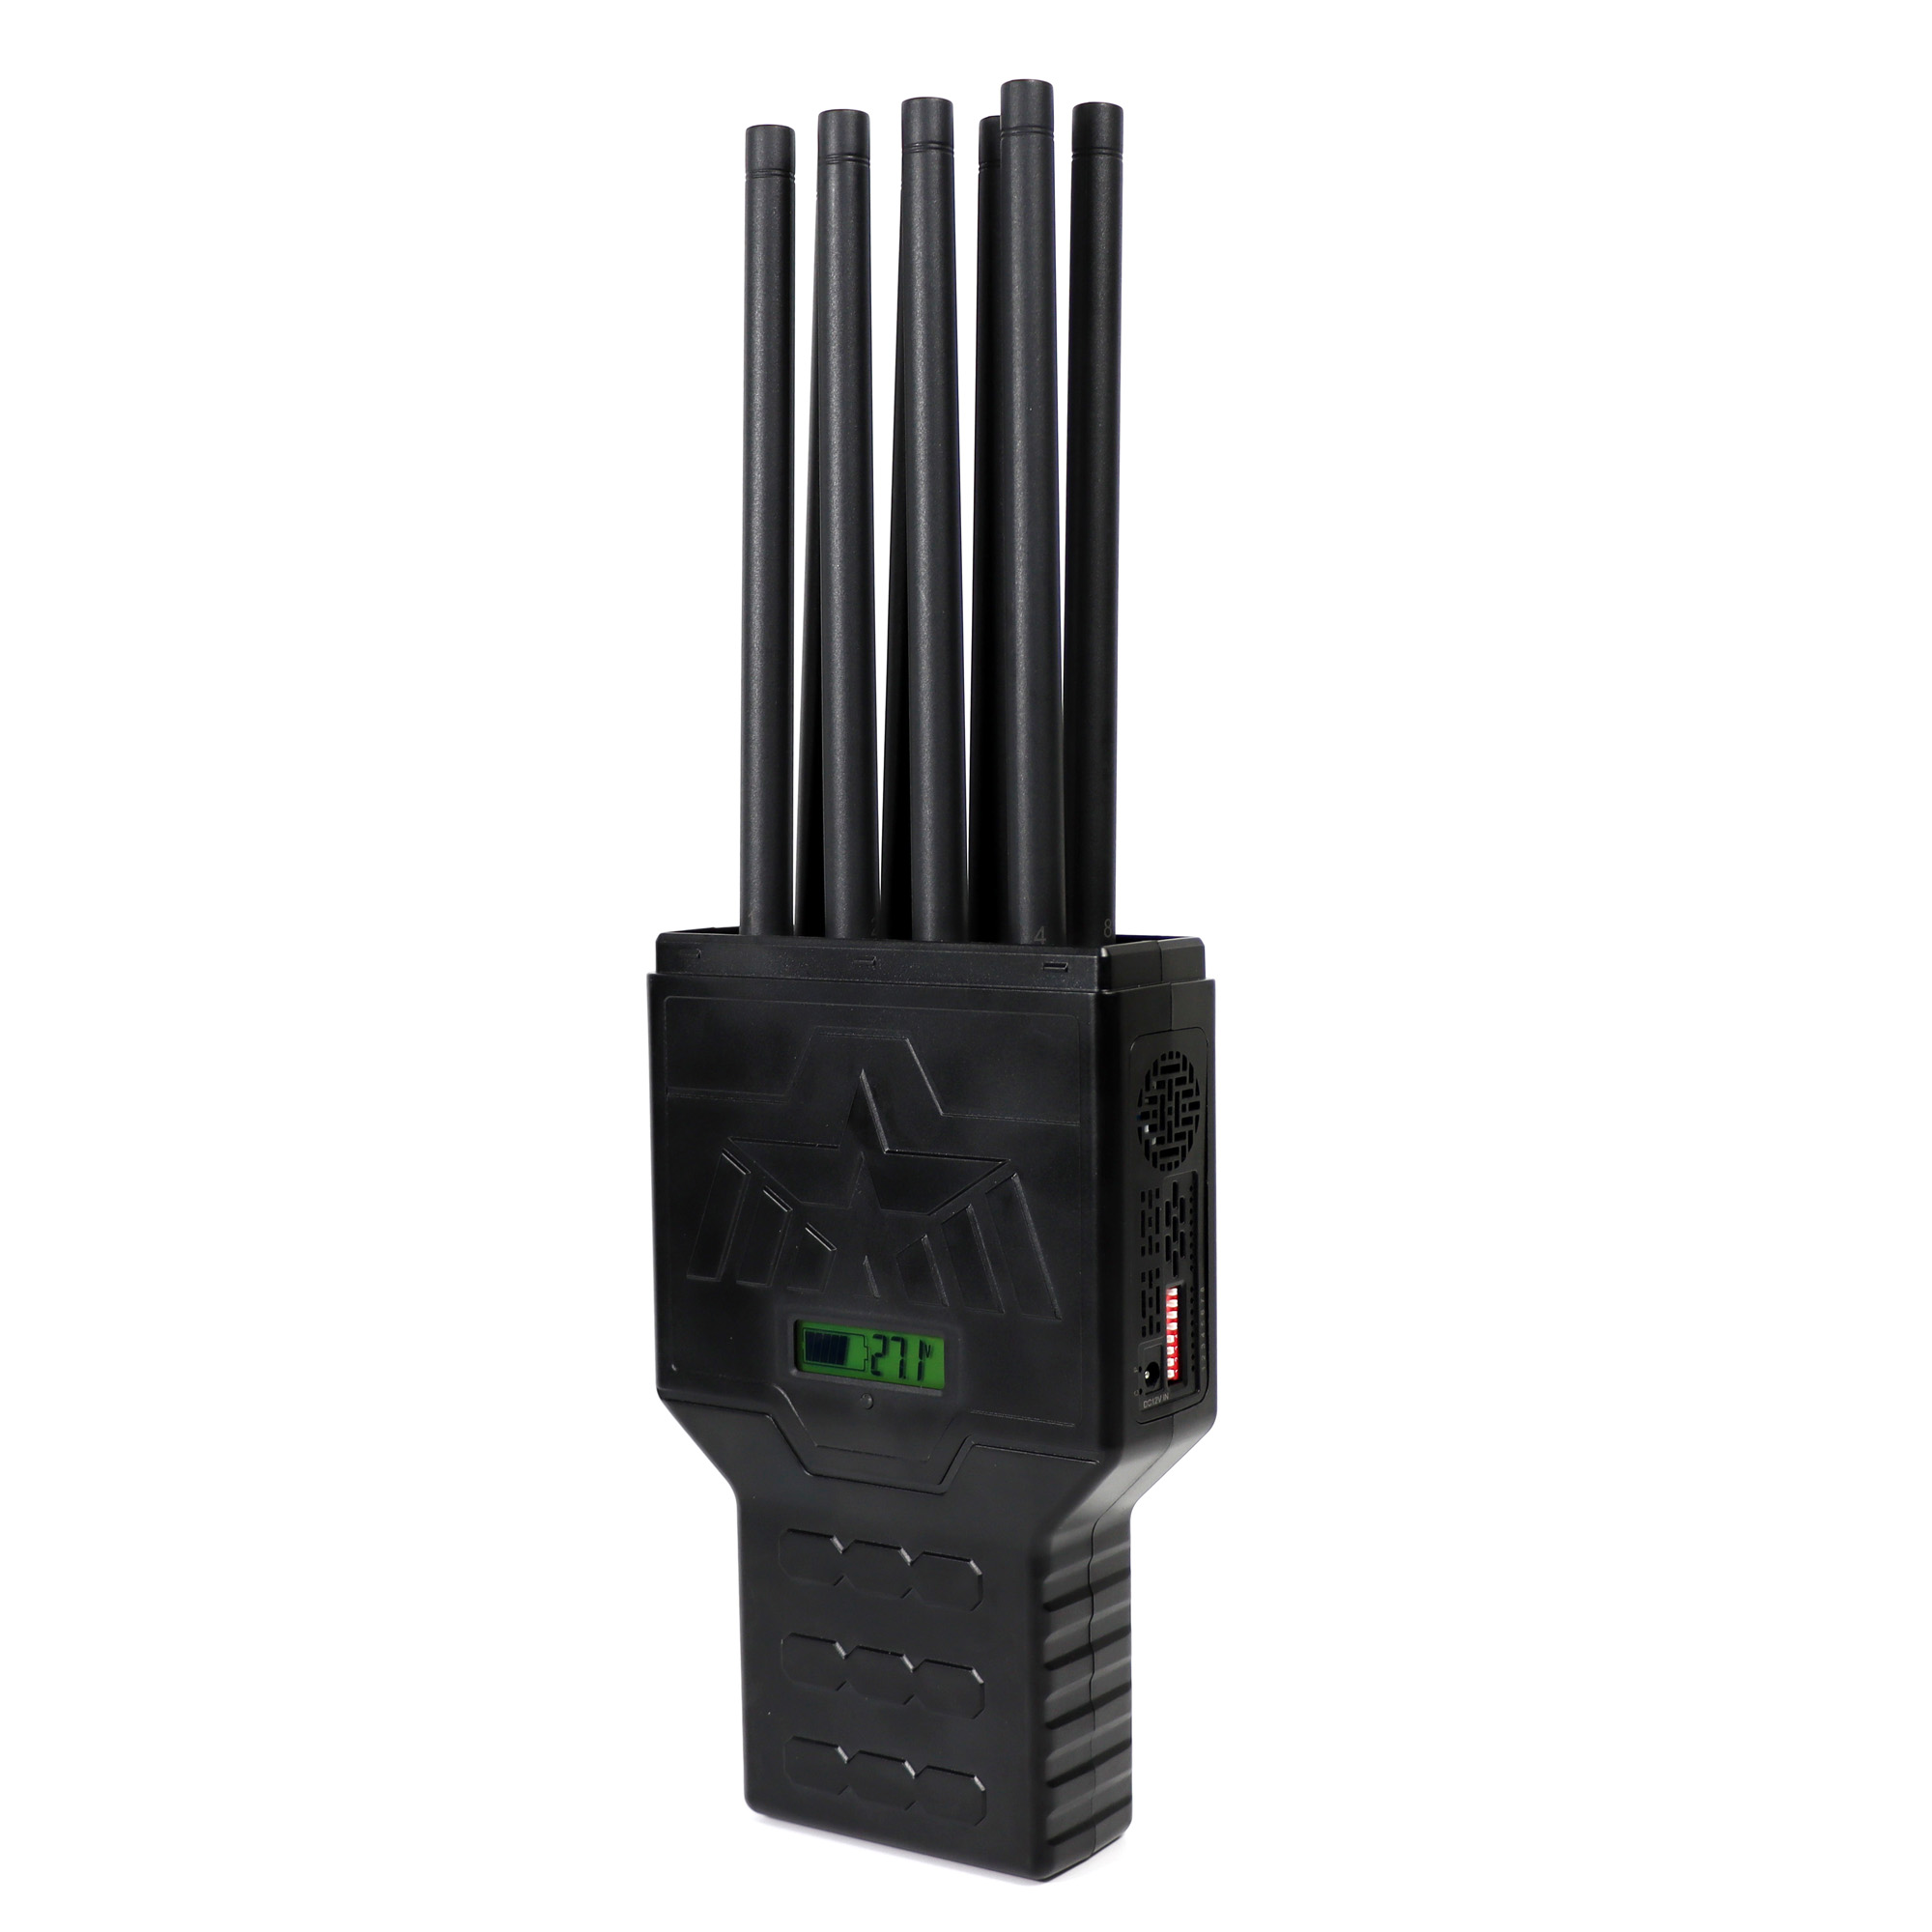 8 bands wifi signal jammer